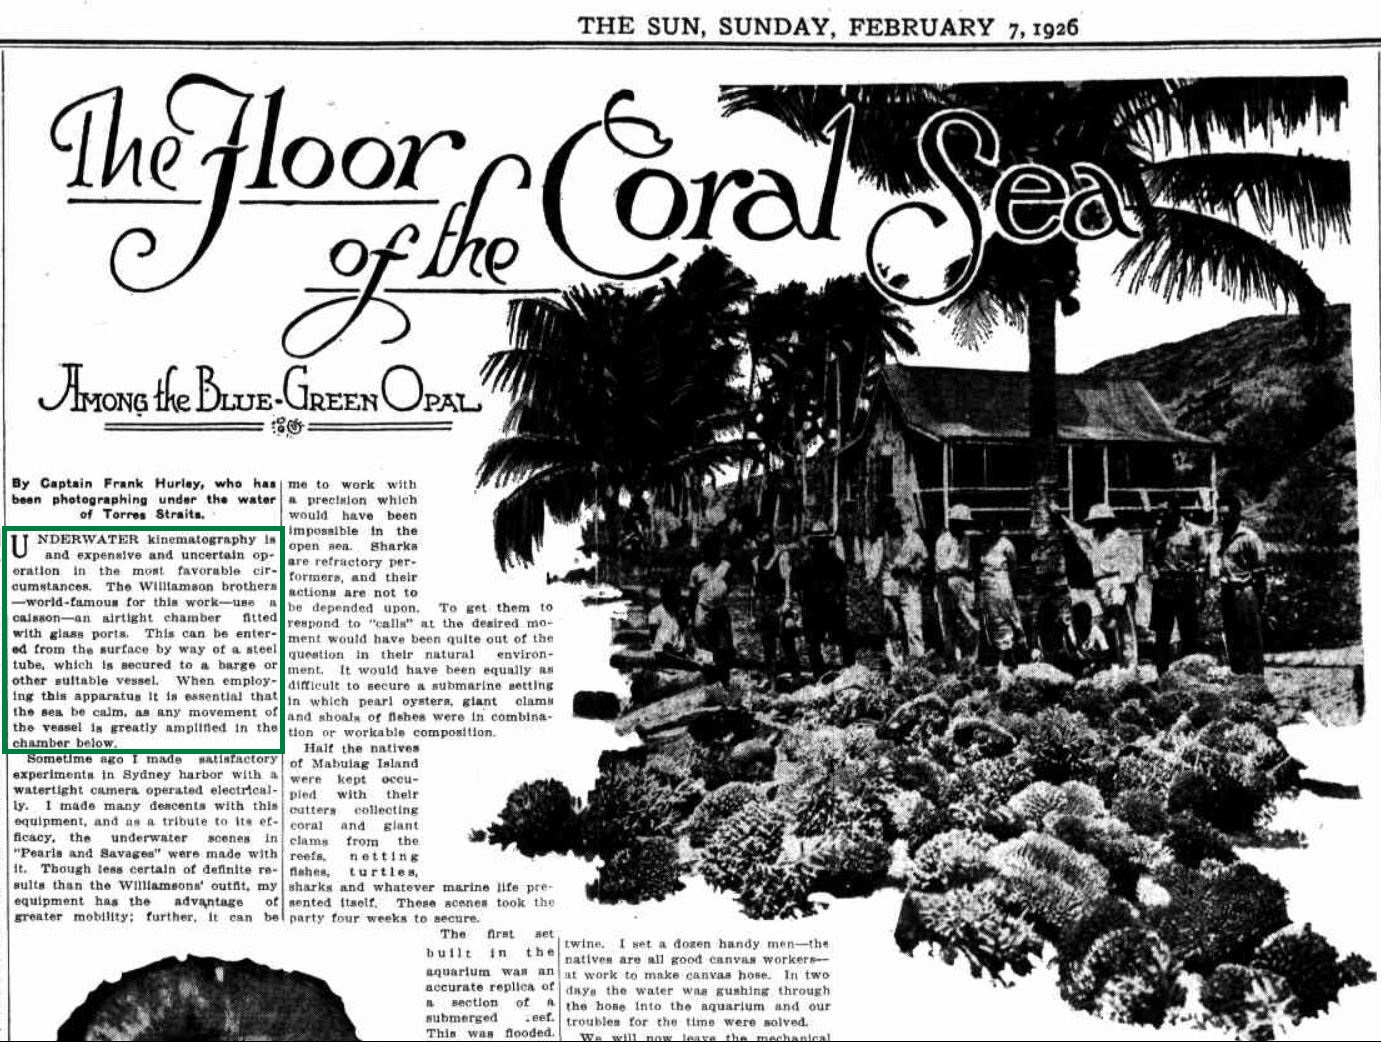 Black and white newspaper article titled The Floor of the Coral Sea published in the Sun newspaper